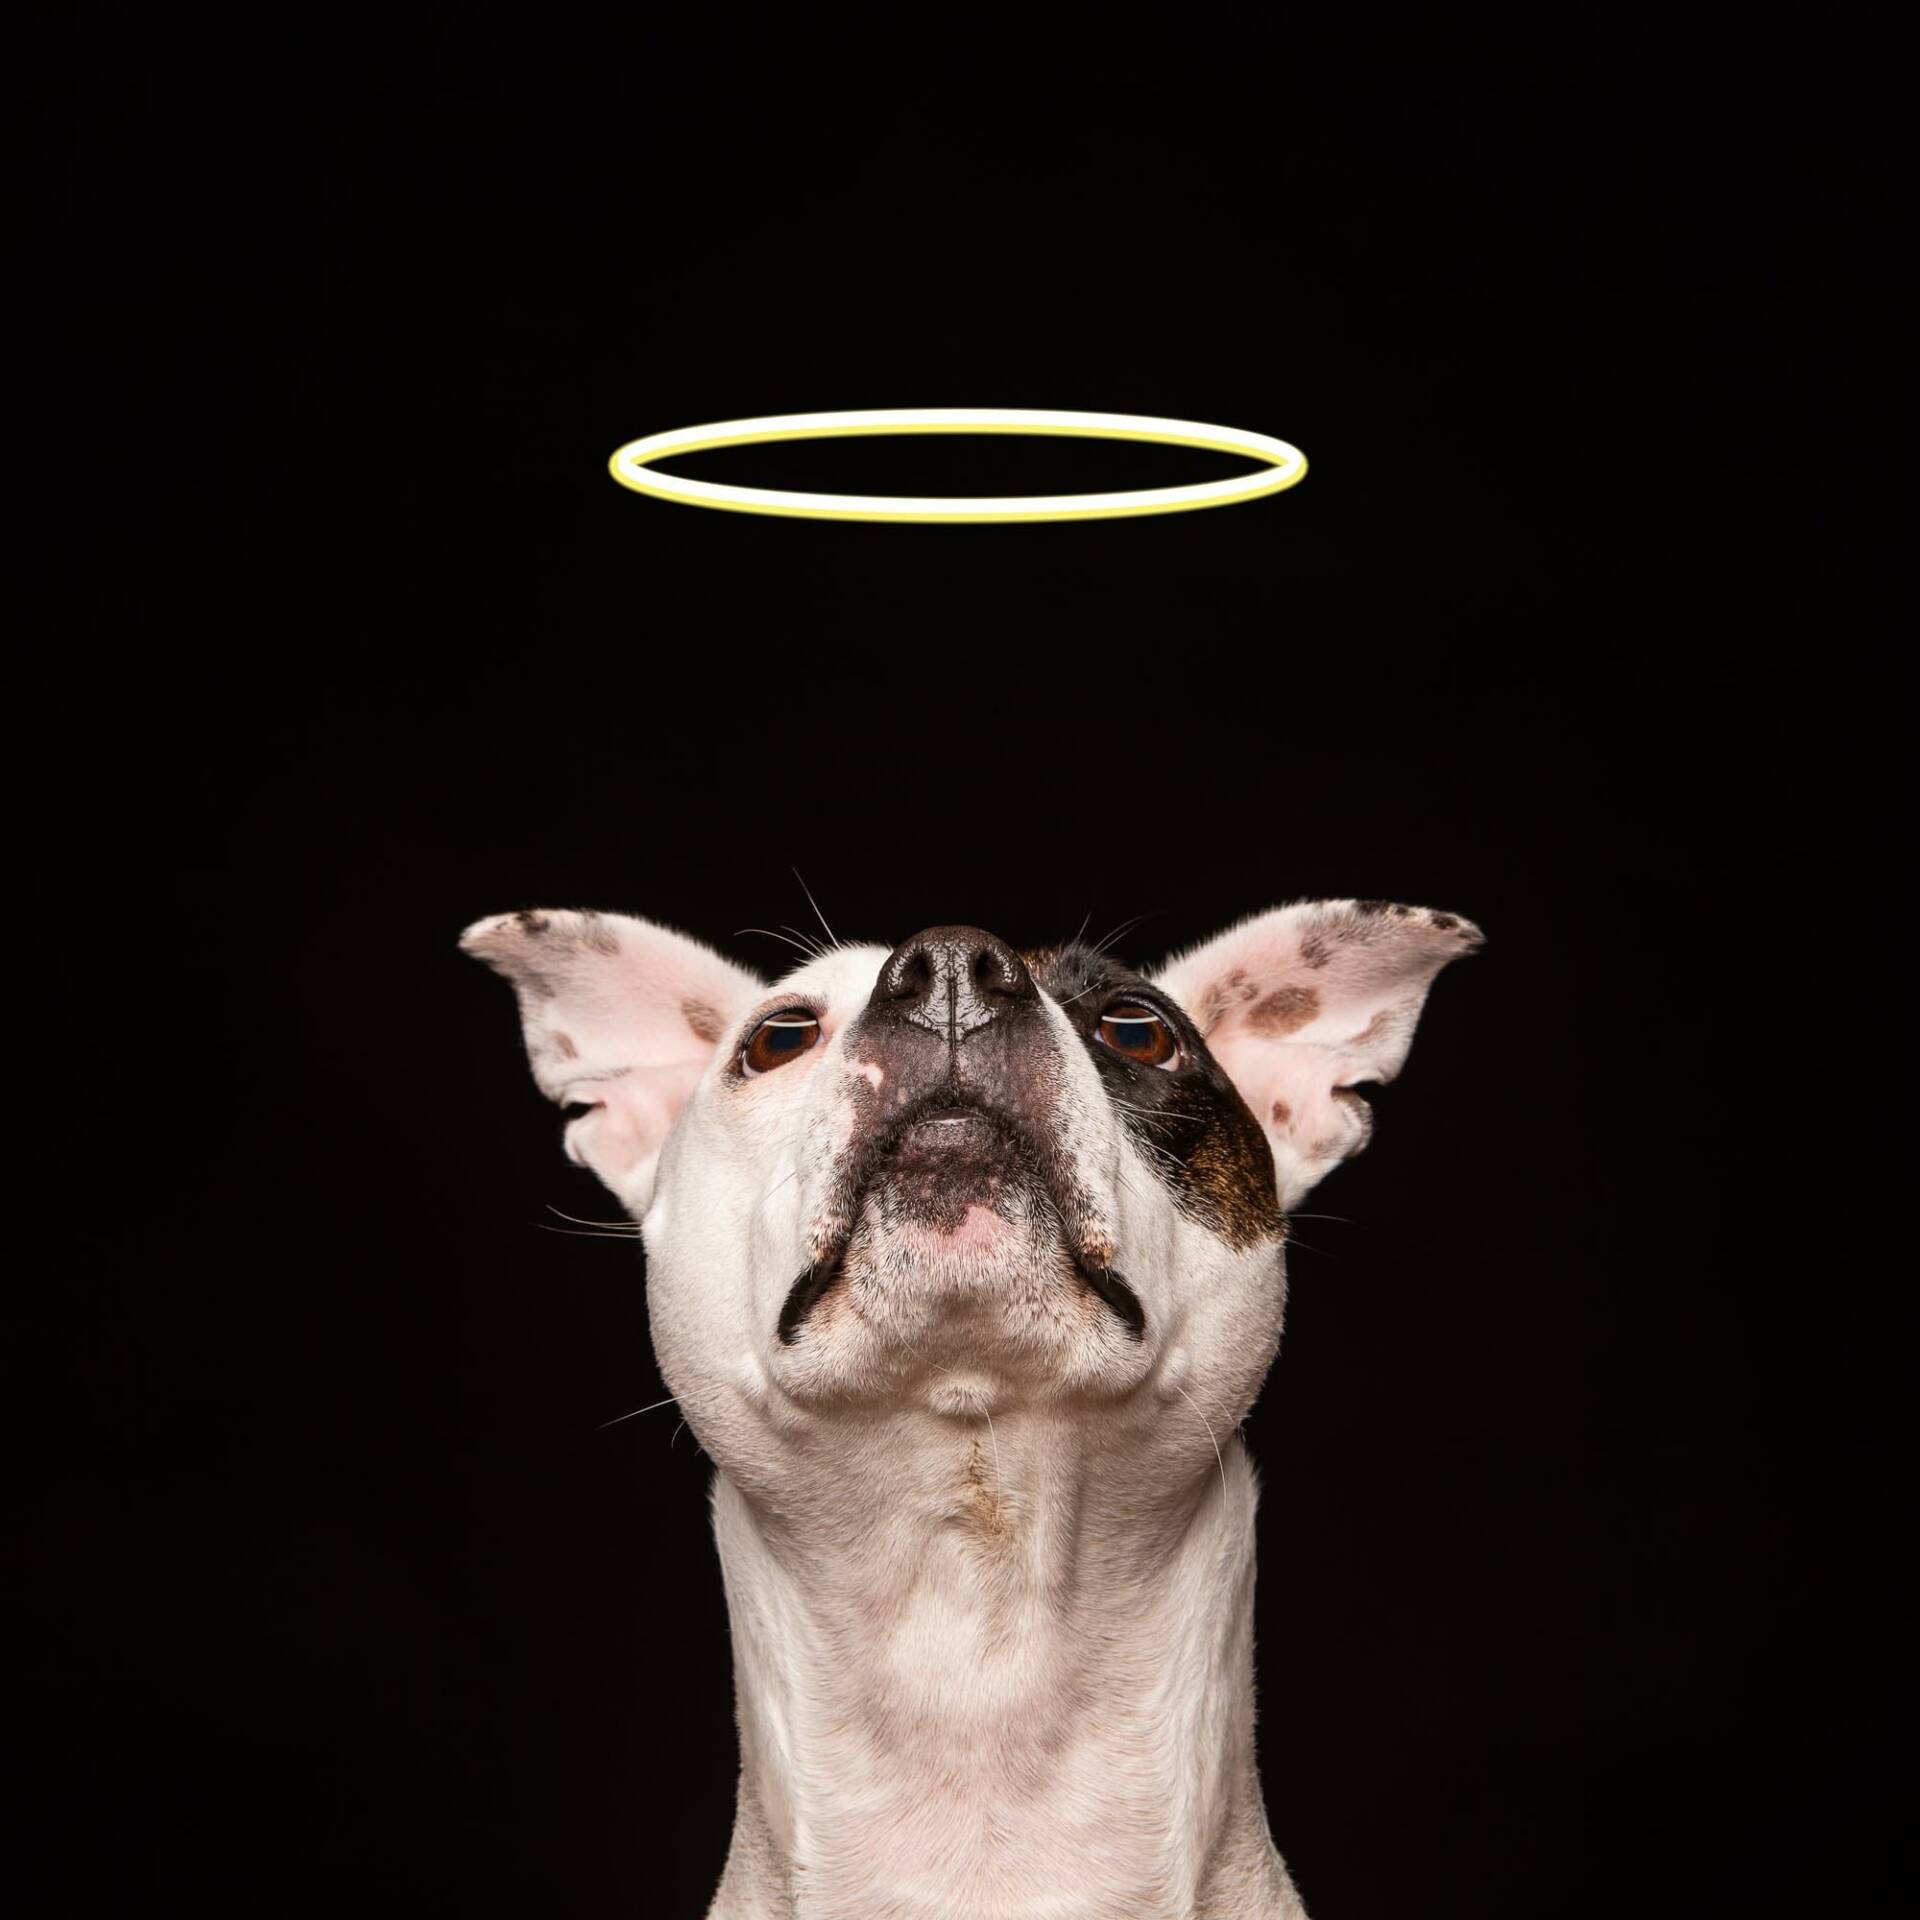 Angelic Staffordshire Terrier by Mark Hewitson of Mark Hewitson Photography, Thame, Oxfordshire